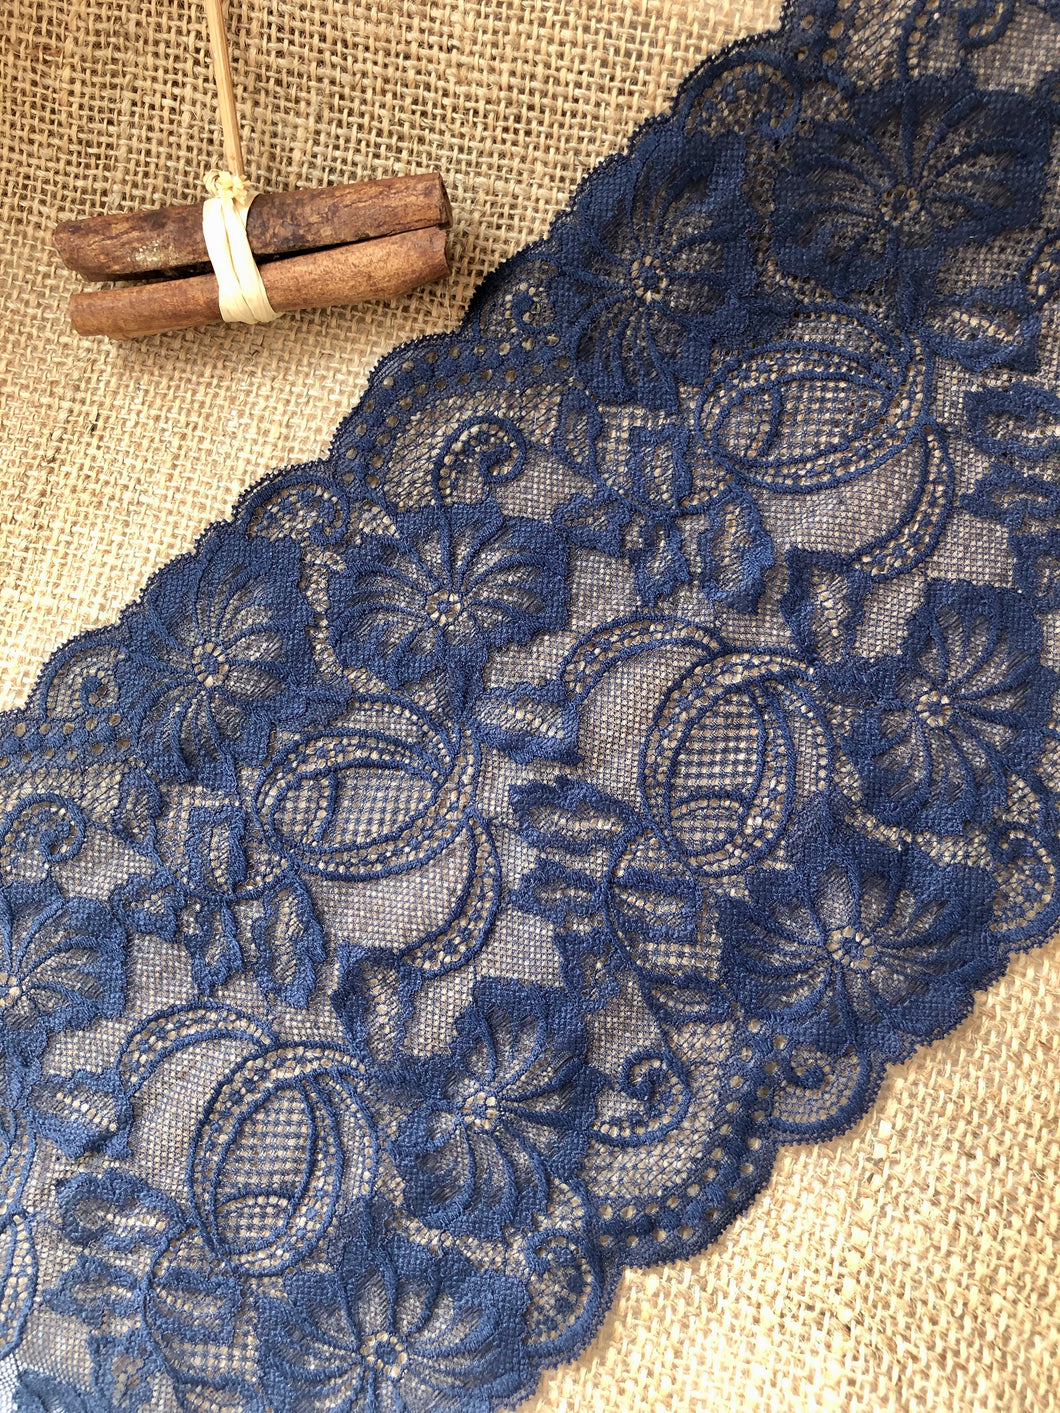 Soft Navy Blue Stretch Lace Wide 18cm/7 Lingerie Craft Sew  www.thelaceco.com – The Lace Co.